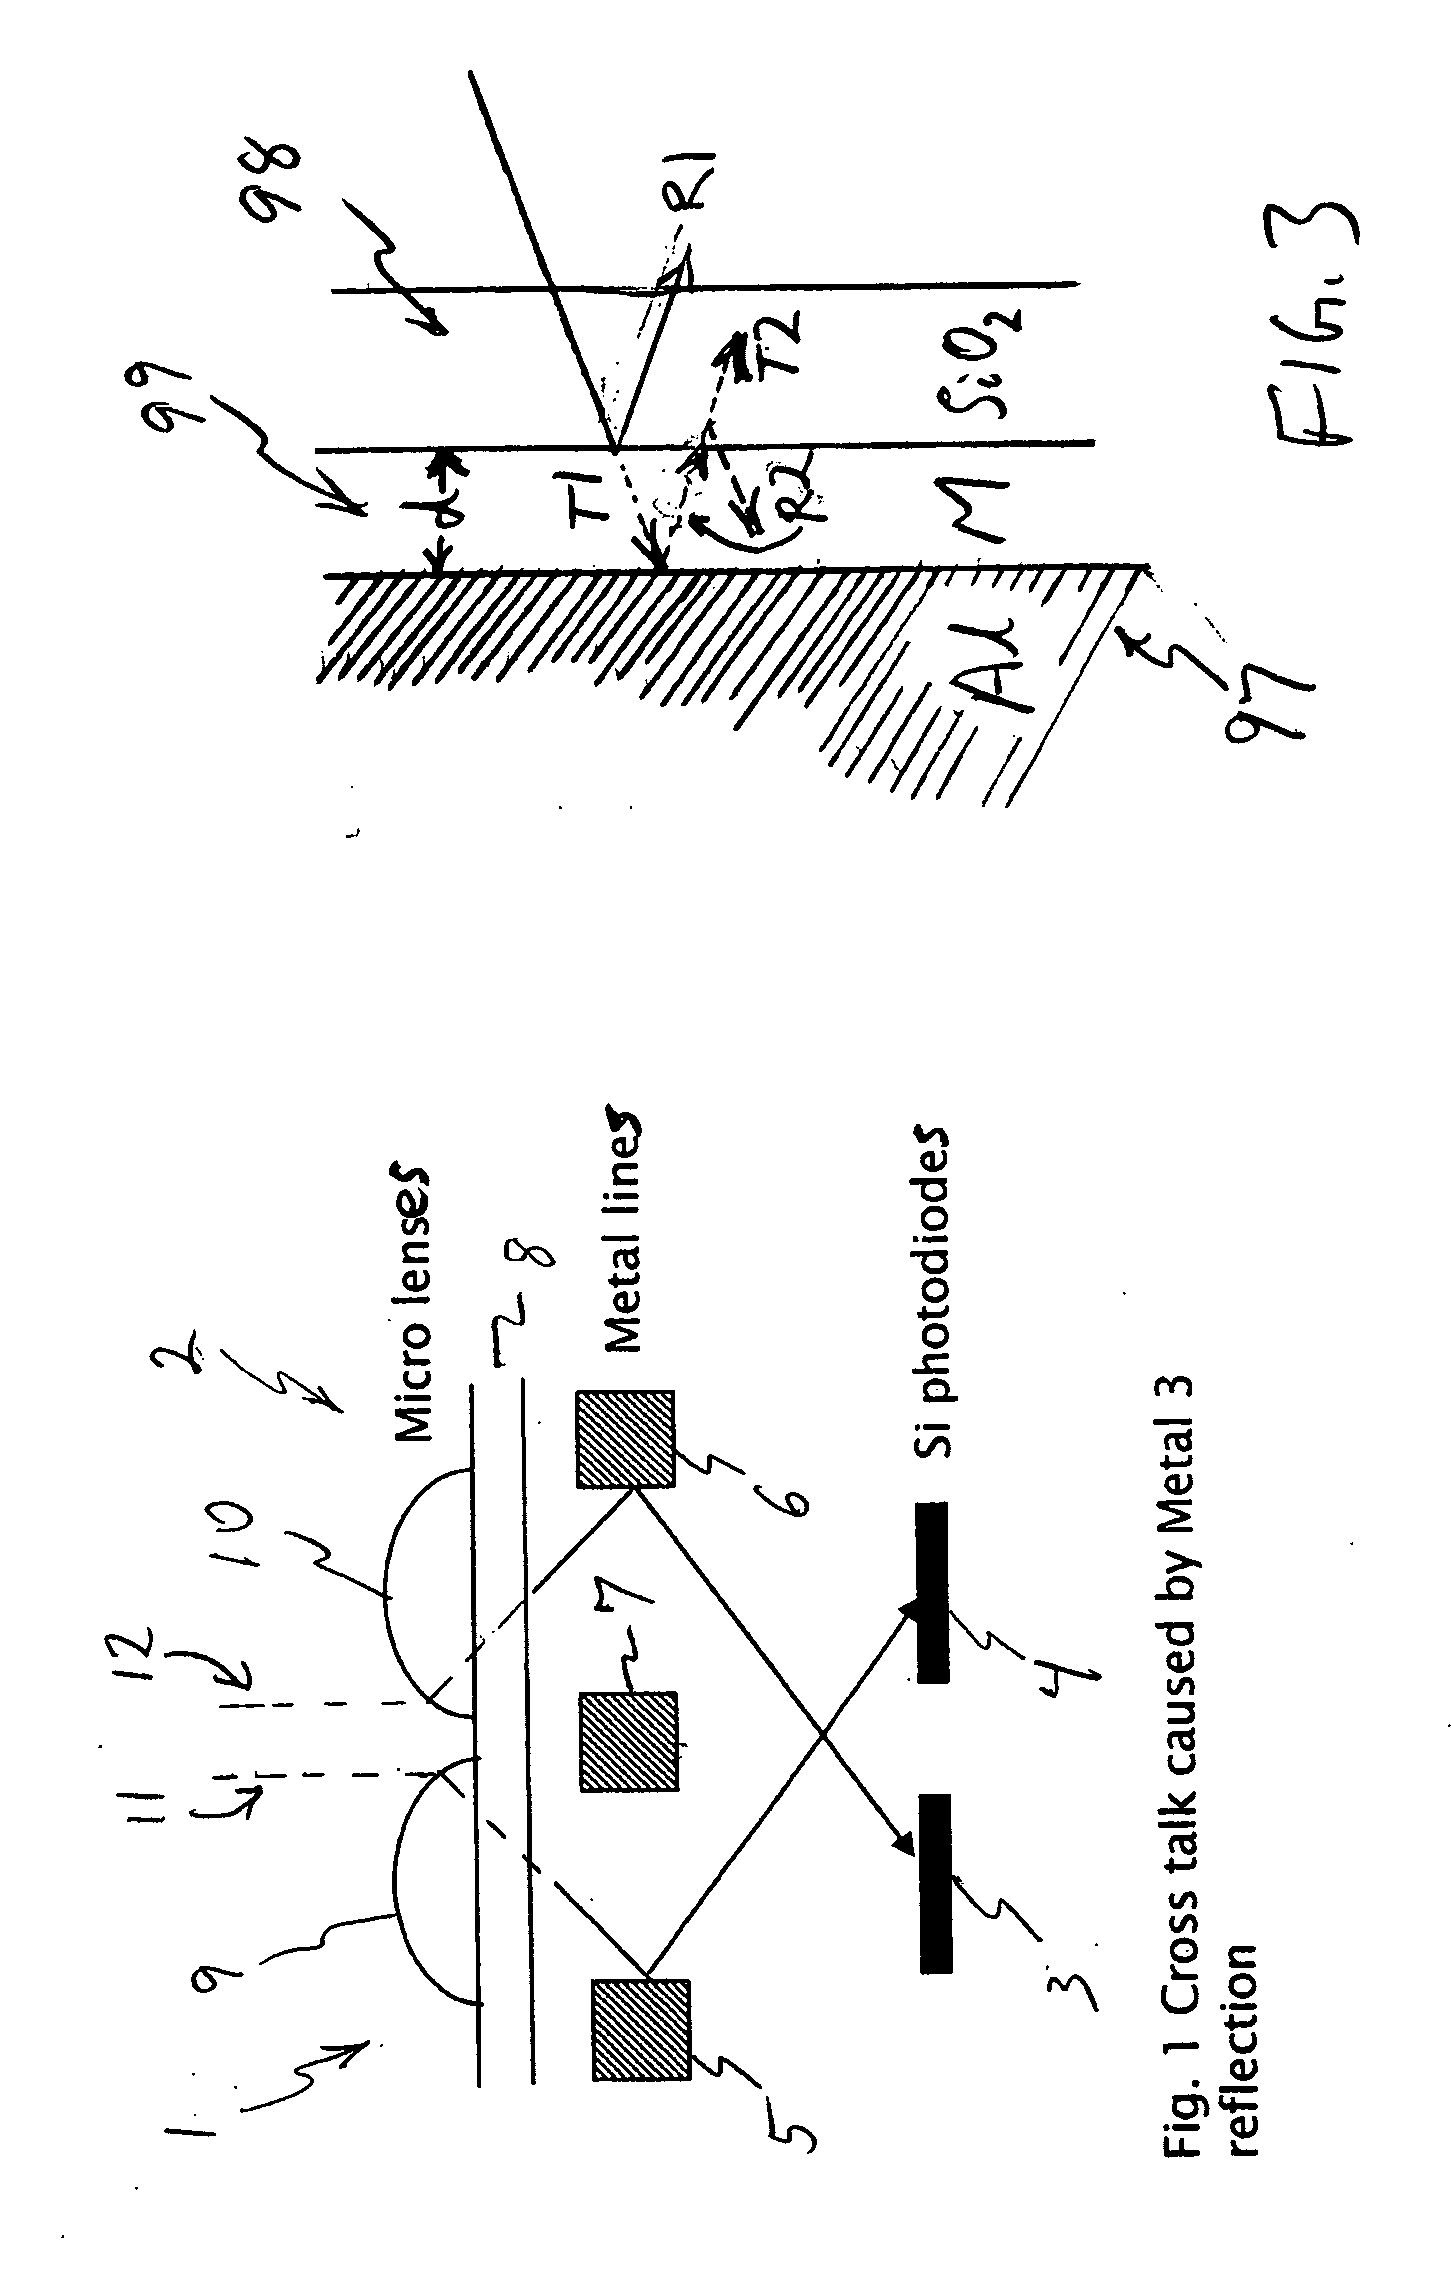 Solid-state imager and formation method using anti-reflective film for optical crosstalk reduction